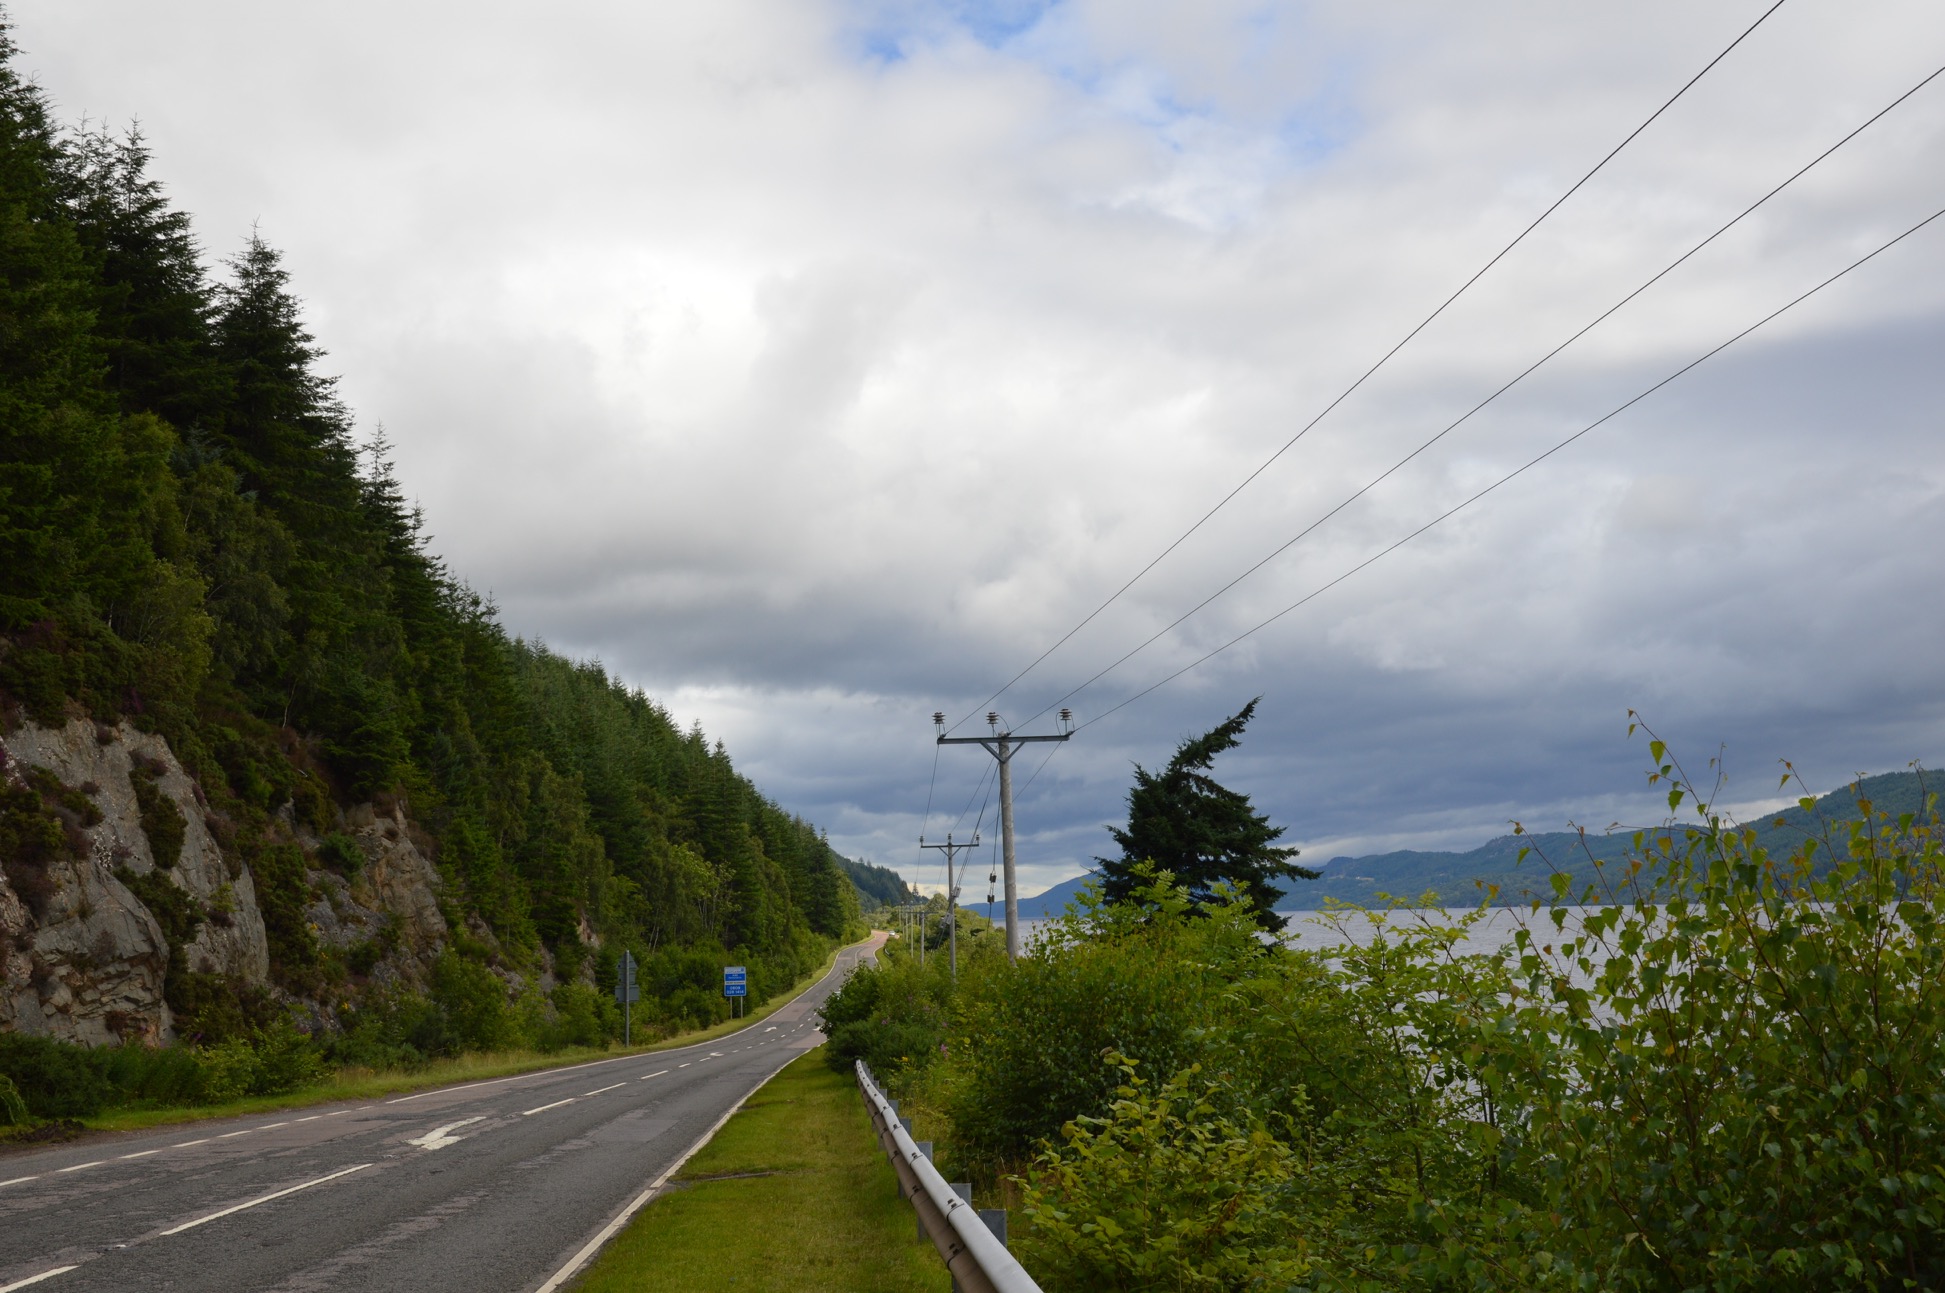 Driving in Scotland from Western Highlands to Inverness